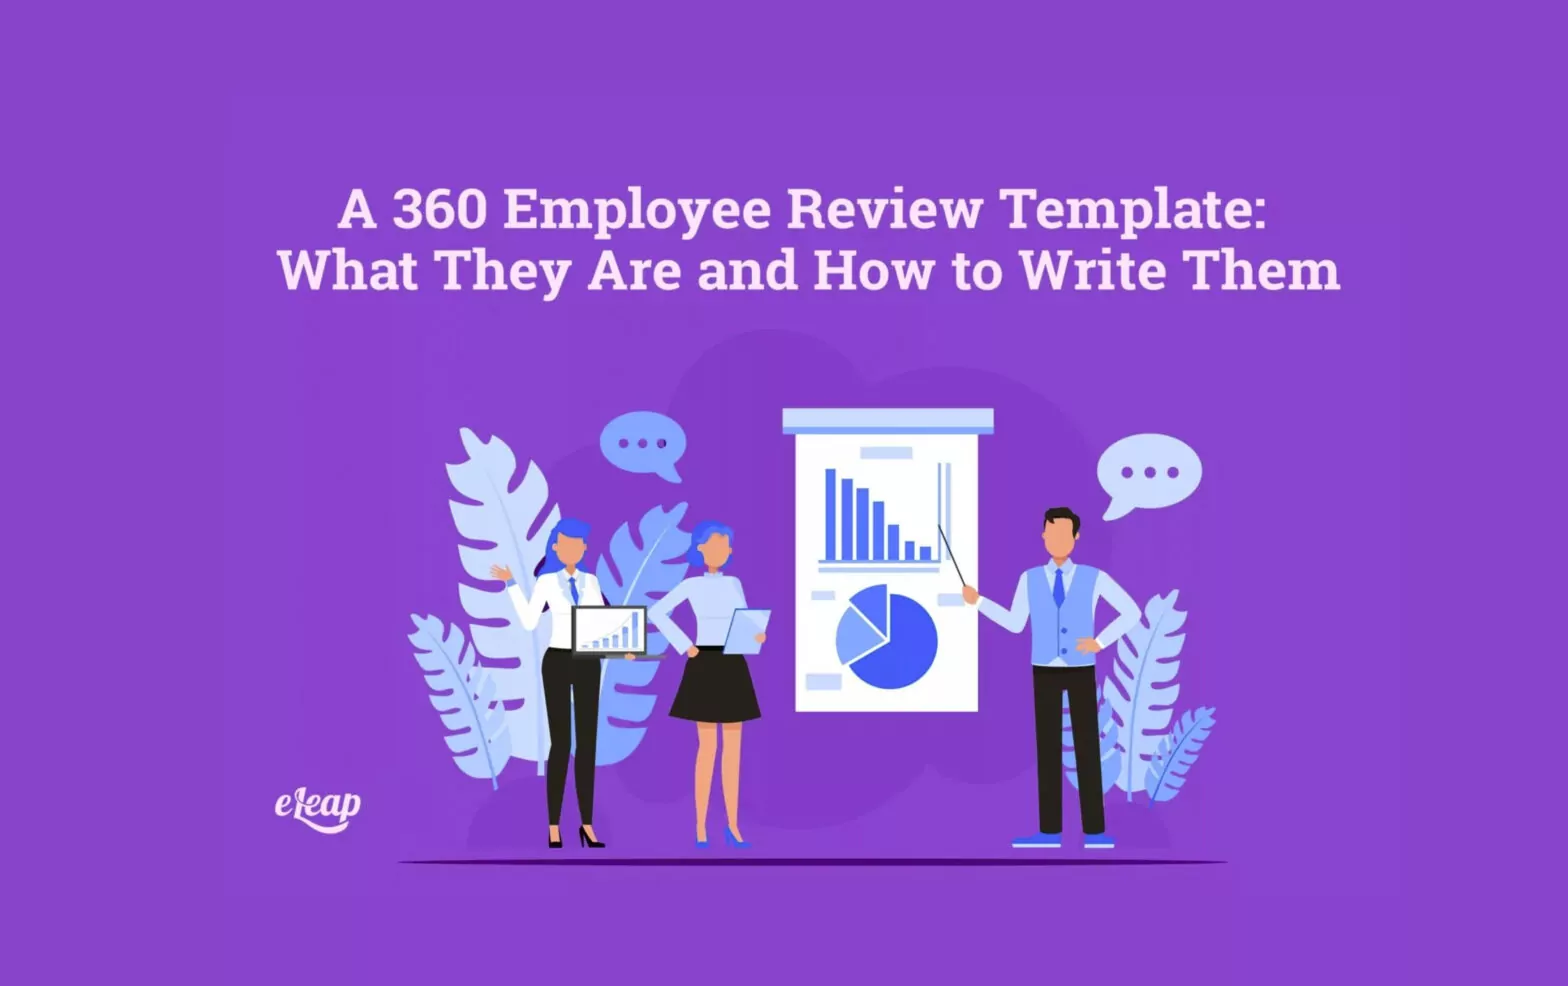 A 360 Employee Review Template: What They Are and How to Write Them